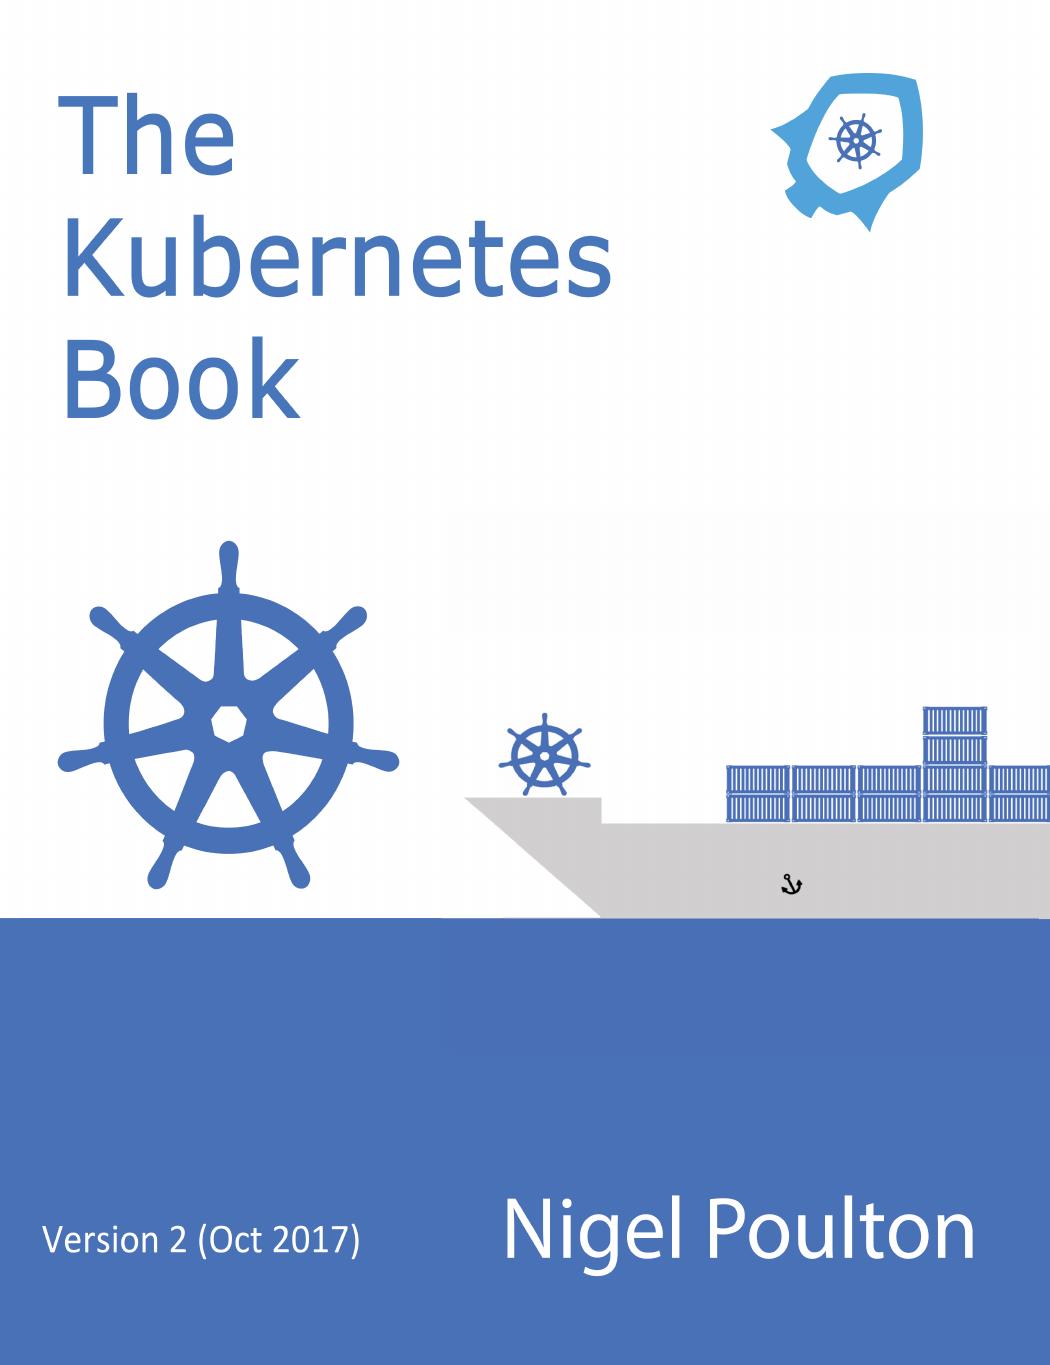 The Kubernetes Book - October 2017